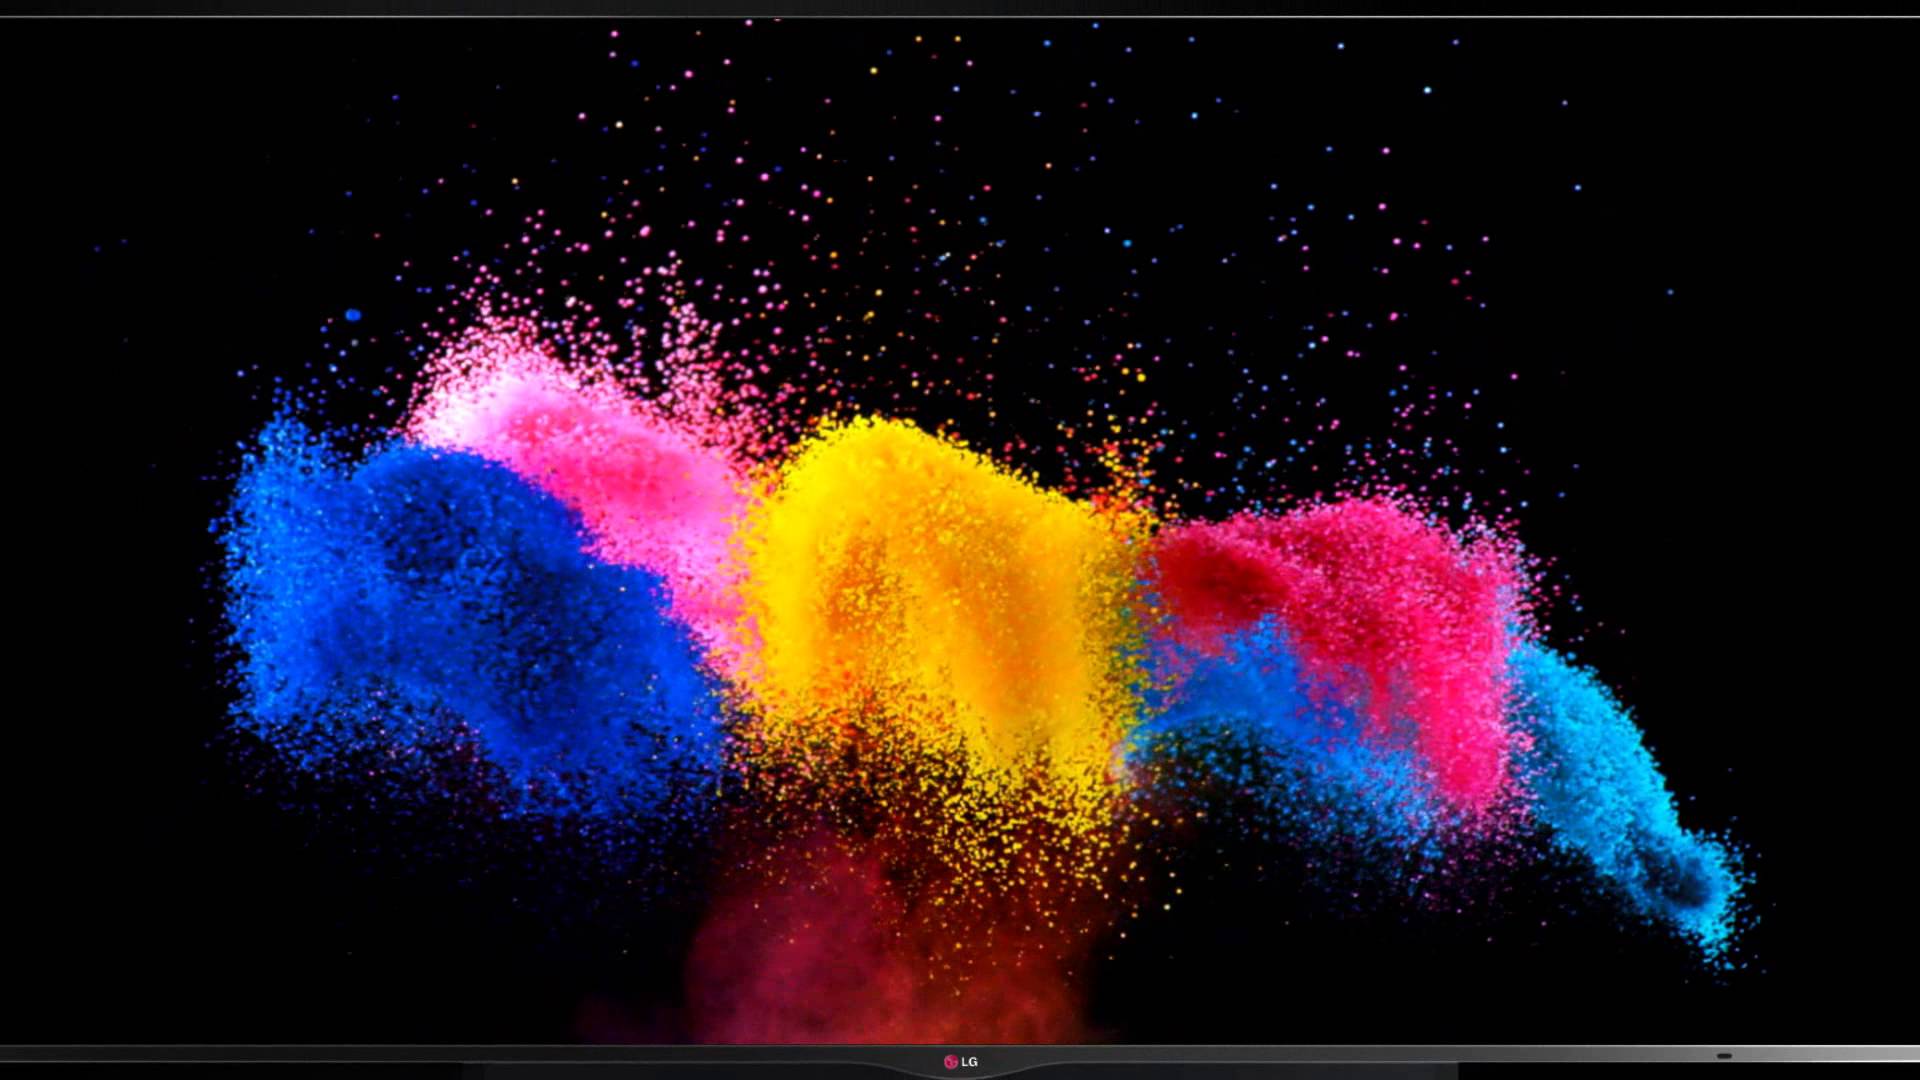 OLED Wallpaper. Samsung AMOLED Wallpaper, Tooled Leather Wallpaper and AMOLED Background